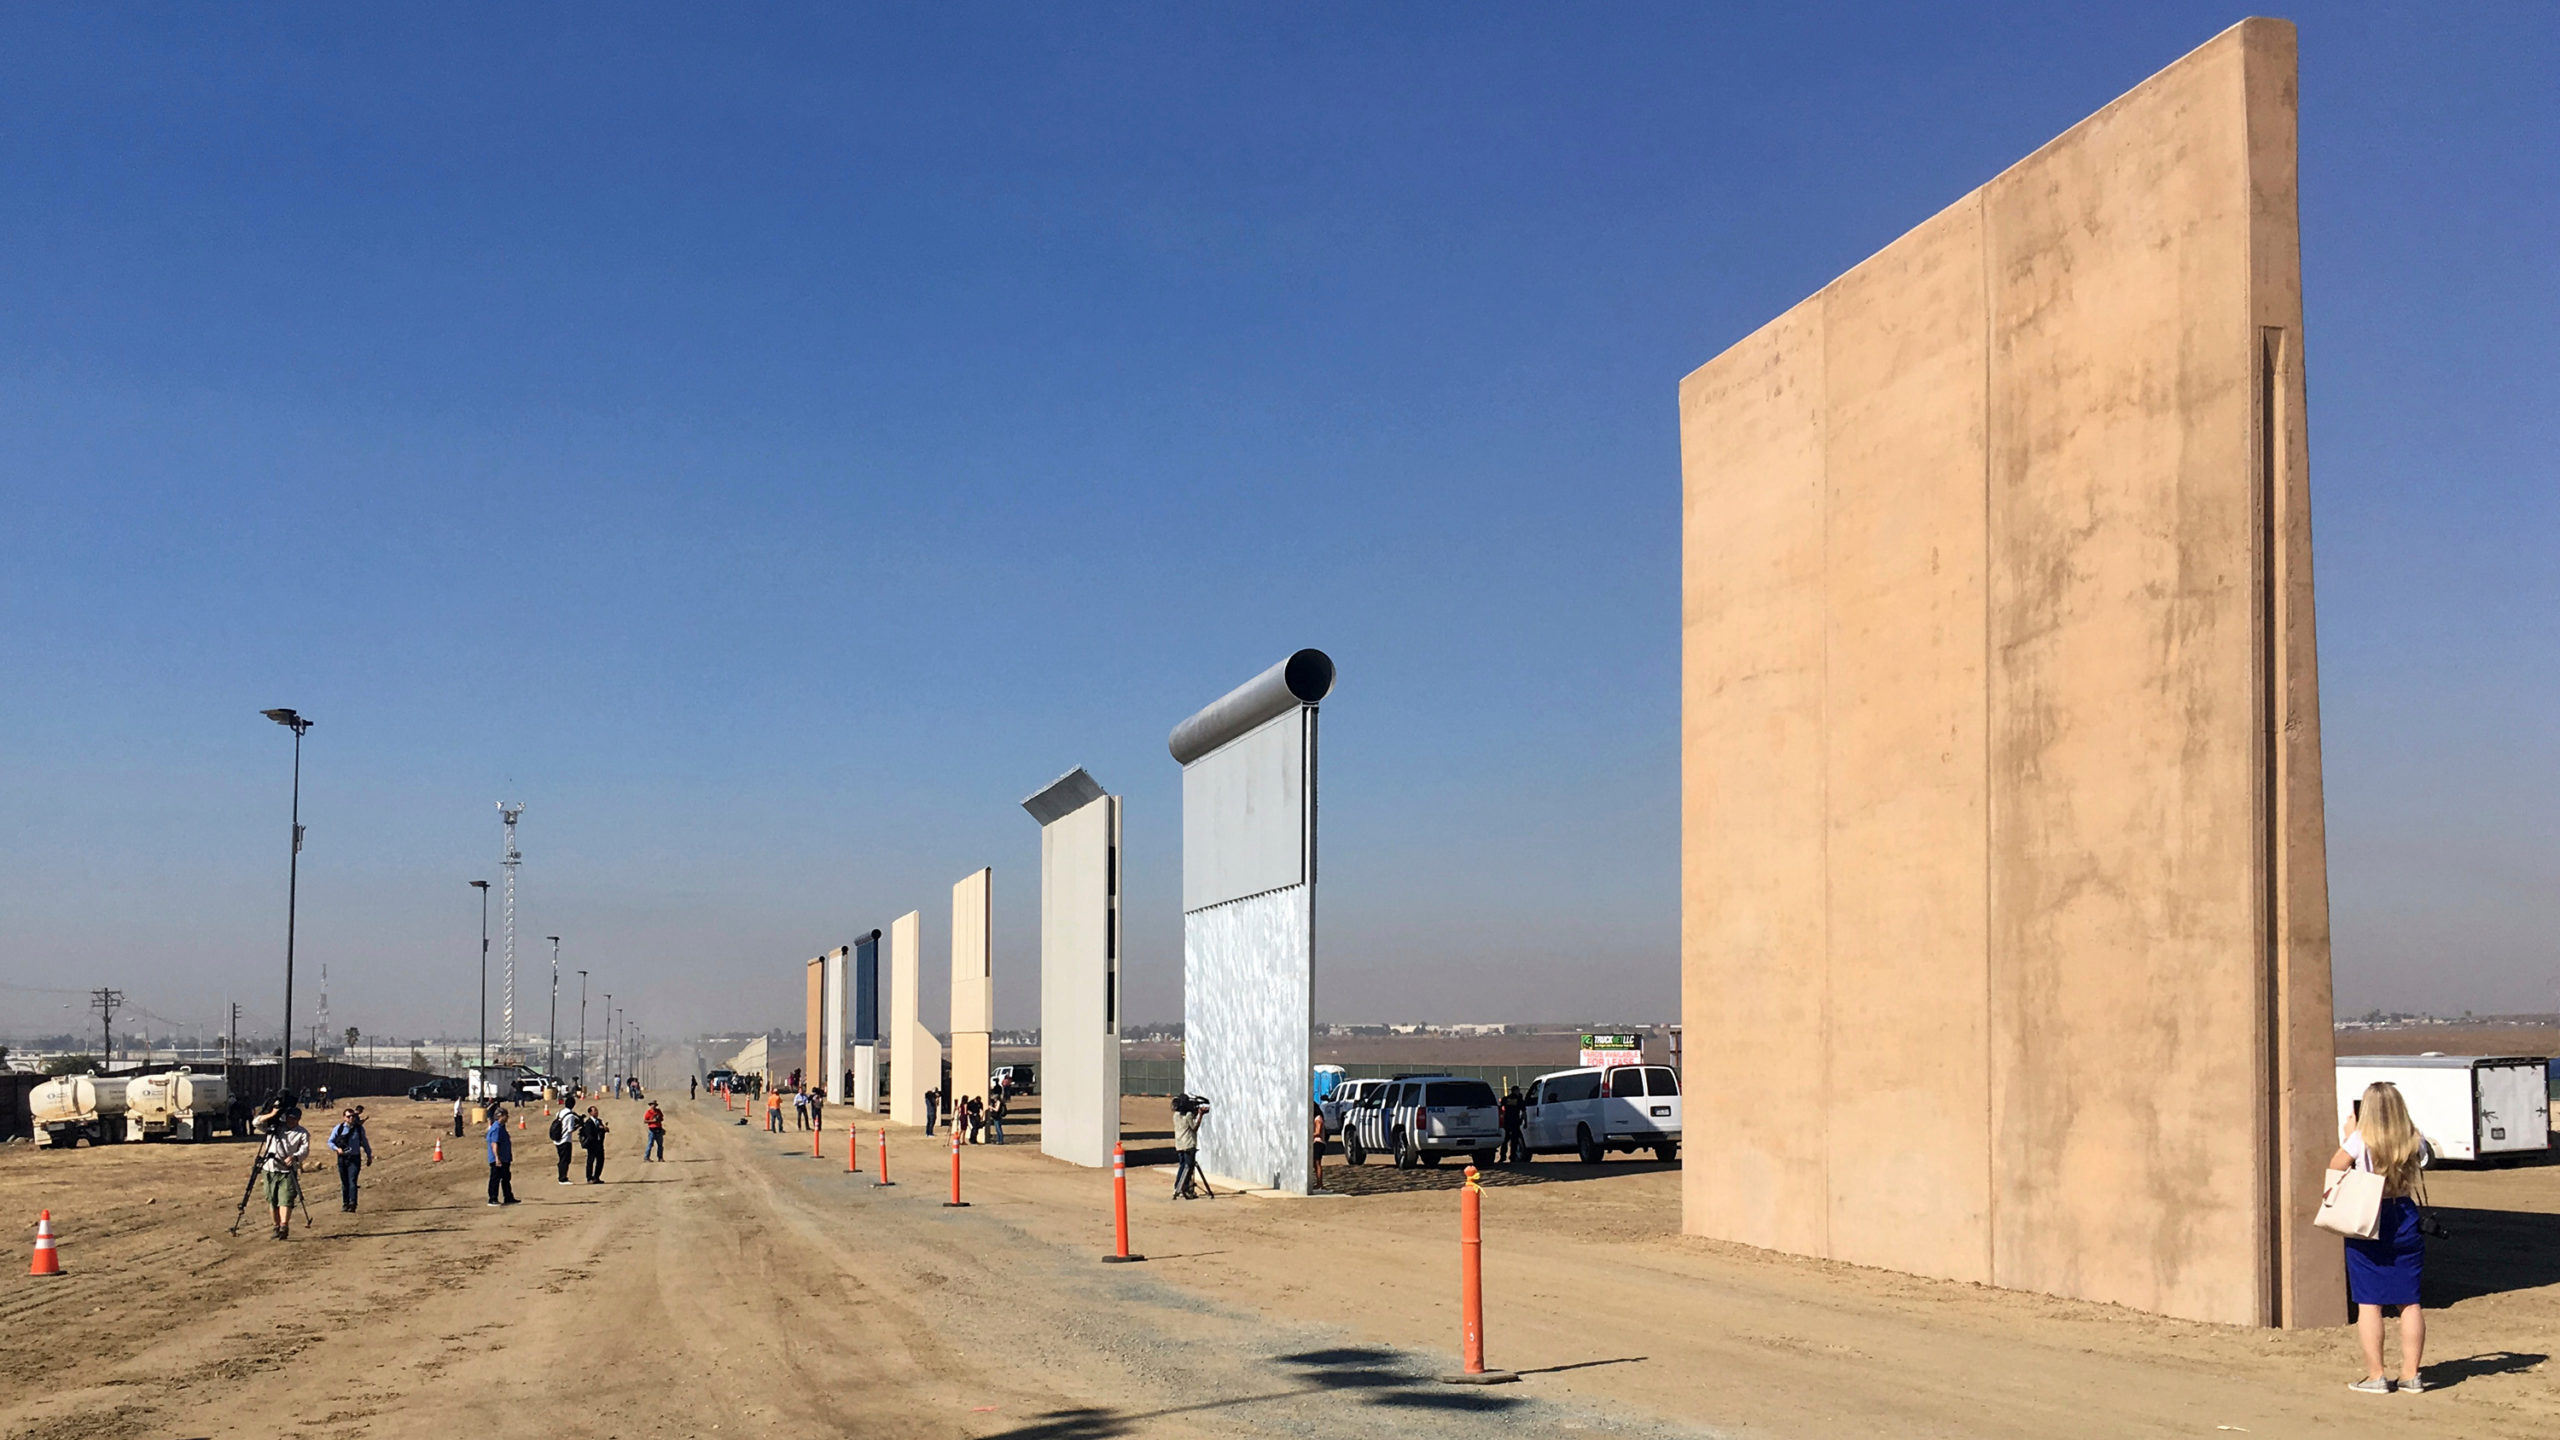 Cards Against Humanity Sells Out Promotion To Screw Up Donald Trump’s Border Wall In First Day